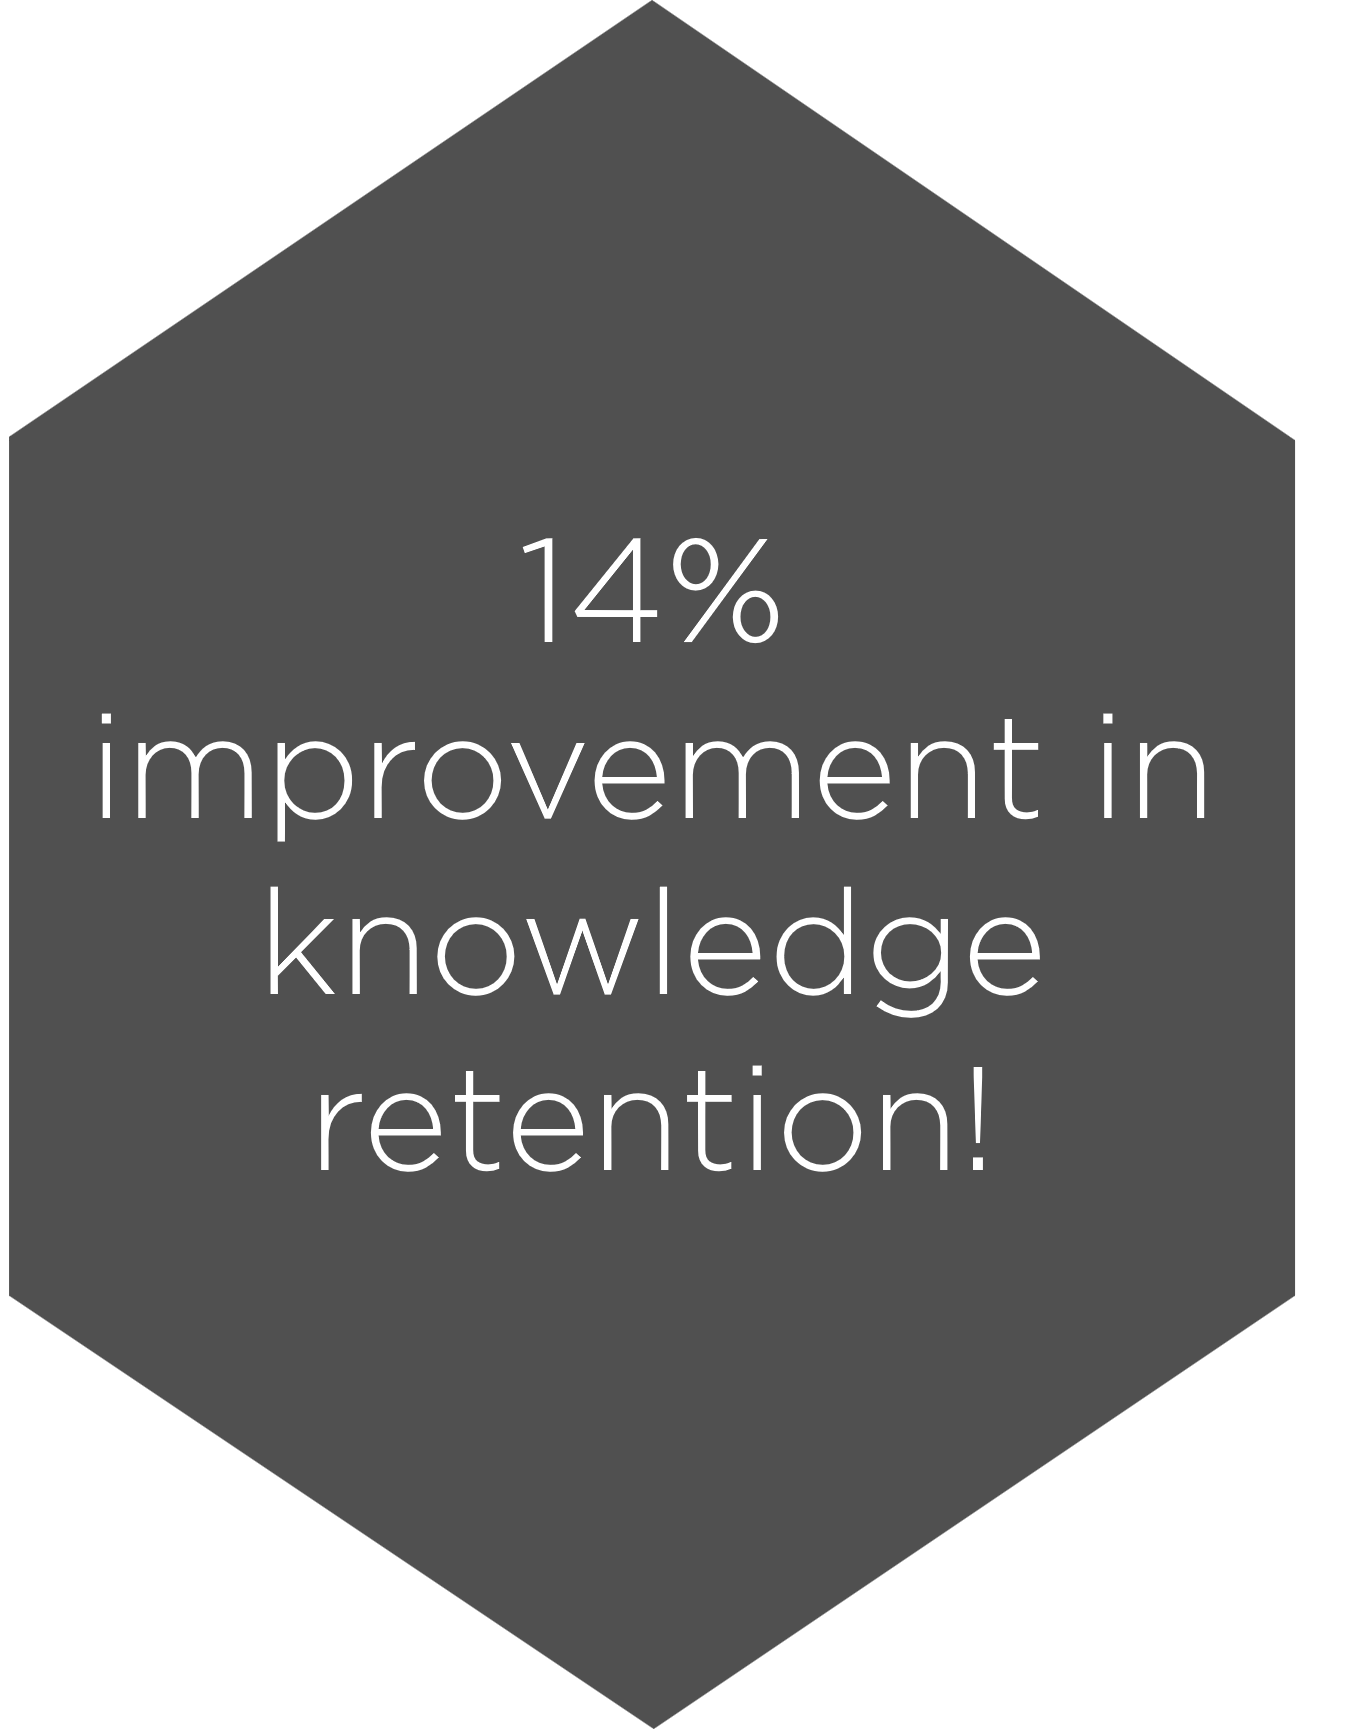 Hexagon with text "14% improvement in knowledge retention!"